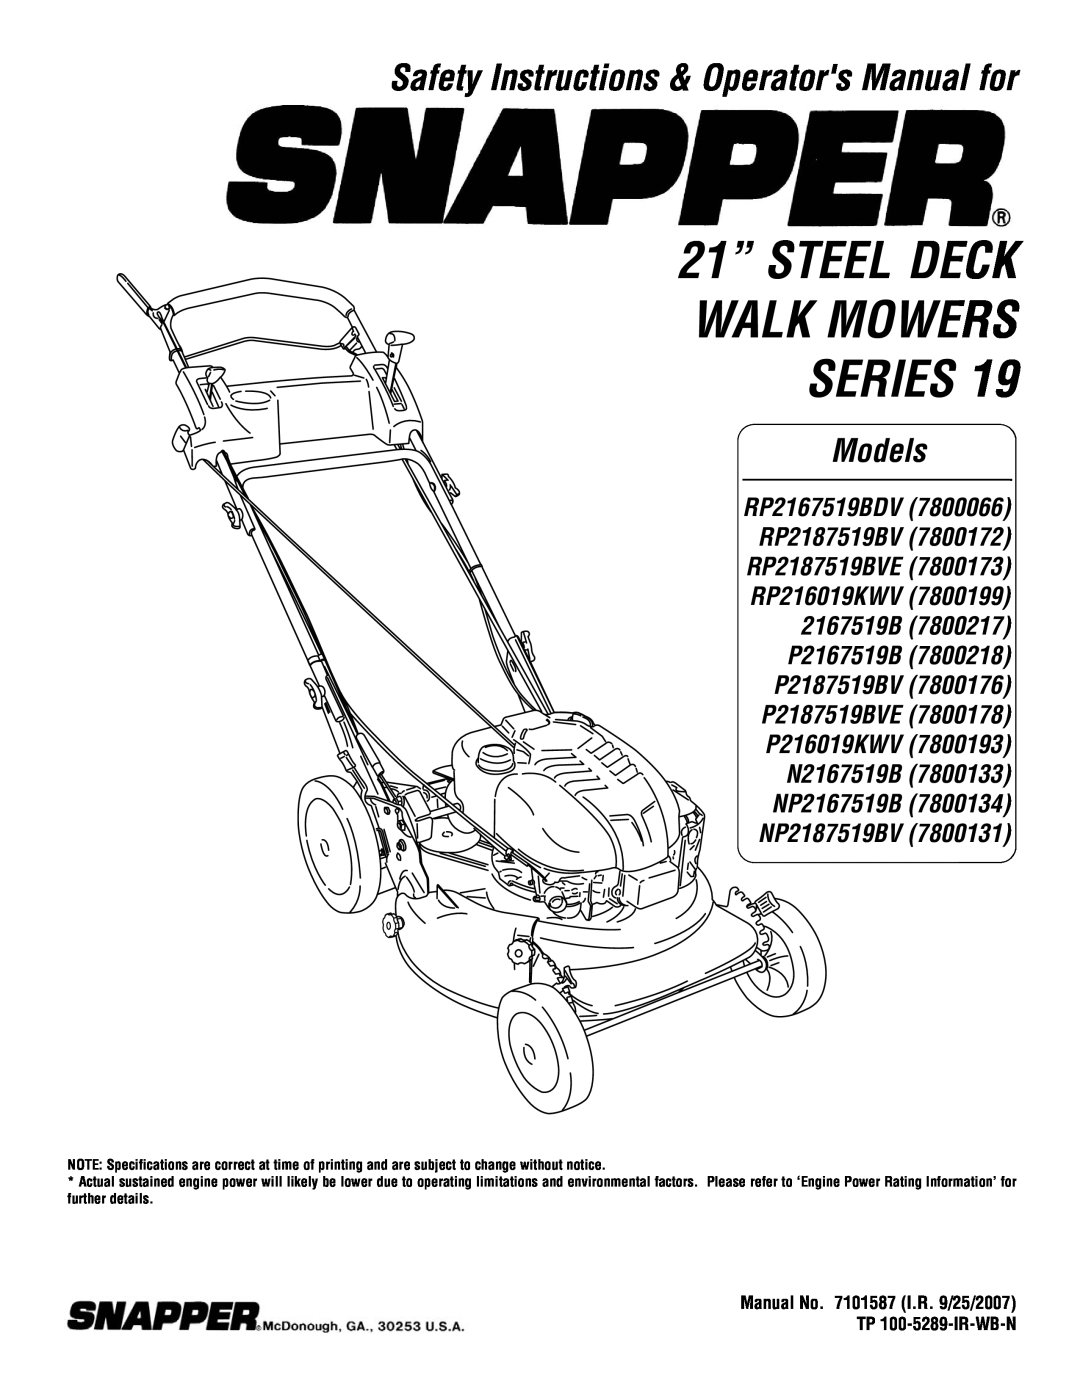 Snapper NP2167519B specifications 21” STEEL DECK WALK MOWERS SERIES, Safety Instructions & Operators Manual for, Models 